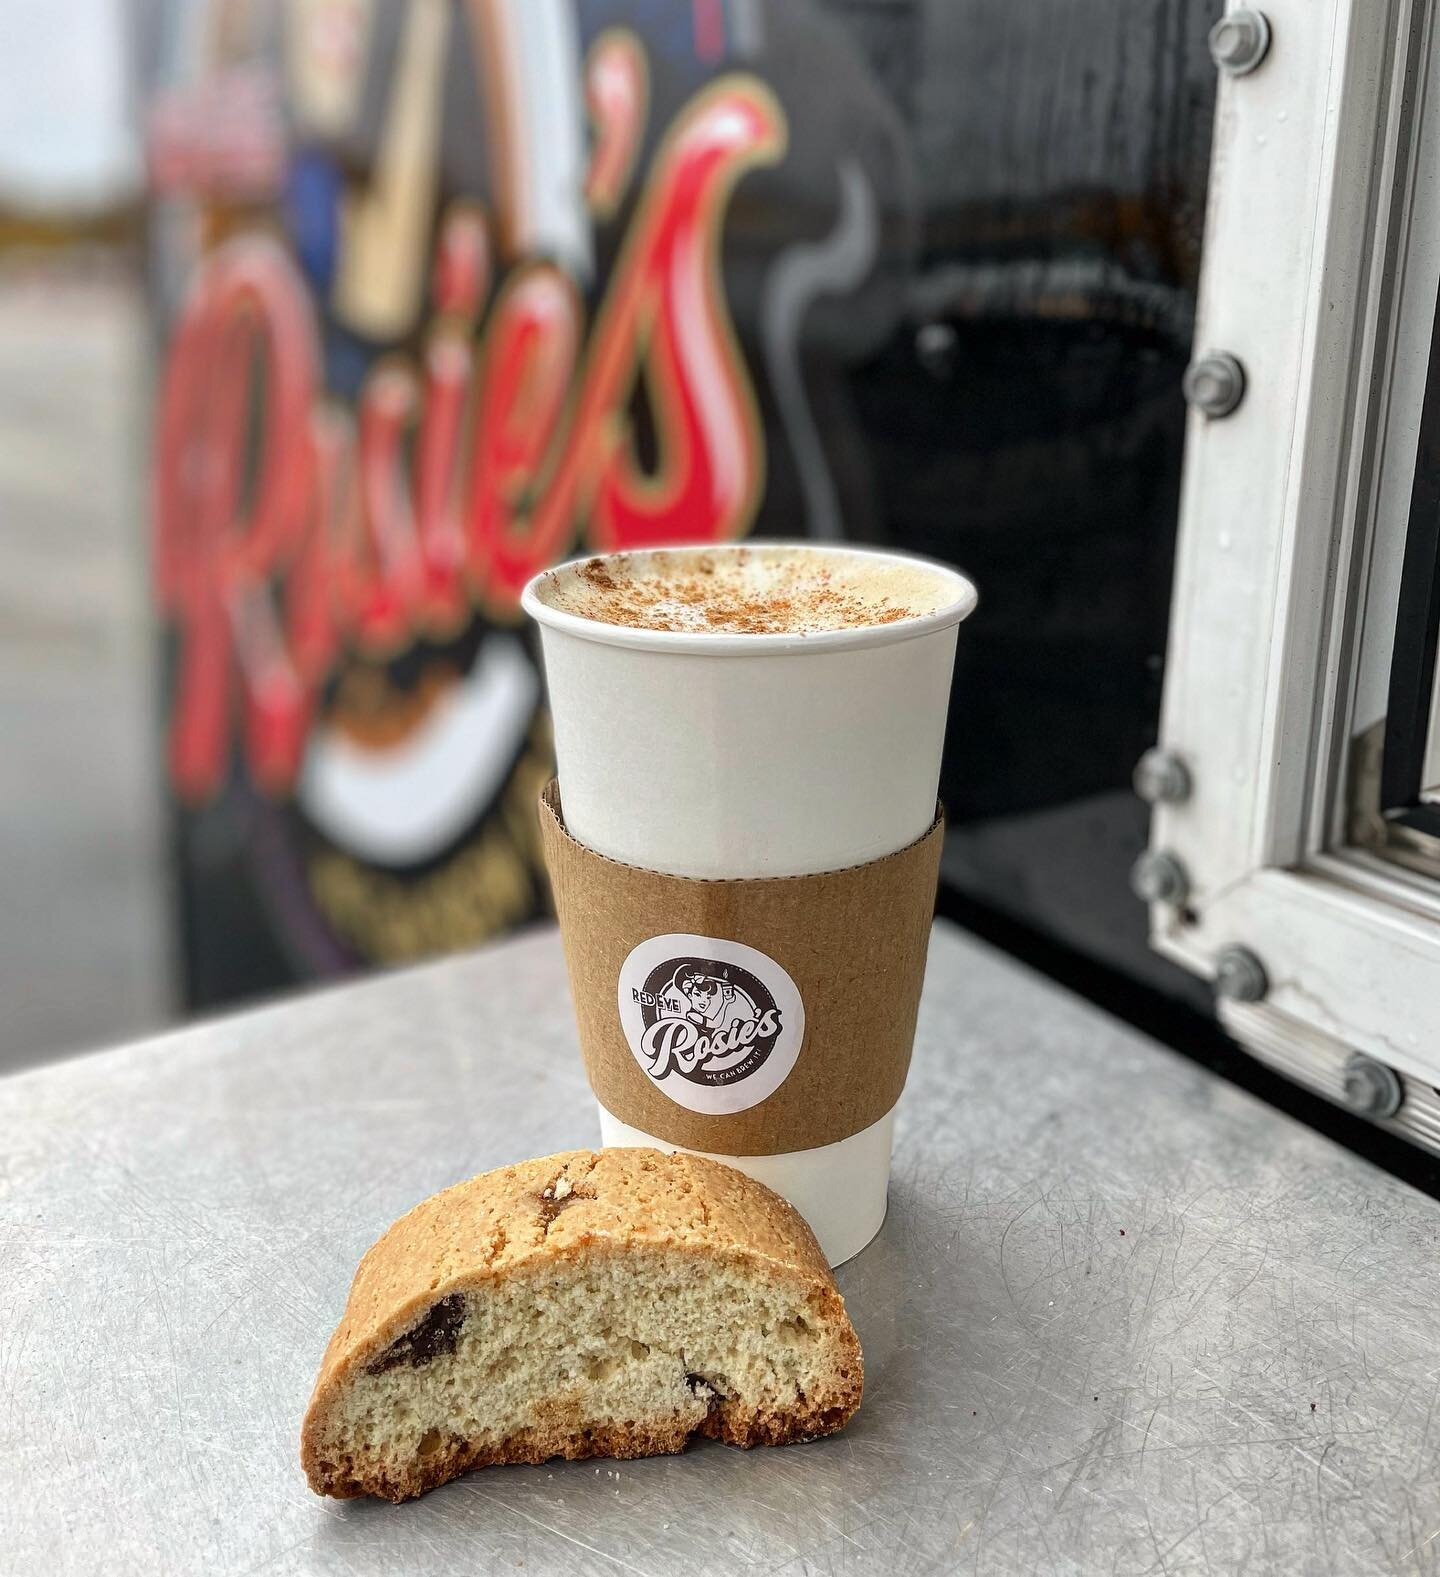 🚨 10/19-10/20 Biscotti Special ‼️

Stop on by Wednesday and Thursday and let the barista know you saw this awesome post to receive a free biscotti with the purchase of a large drink! We can&rsquo;t wait to see you there!! ☕️